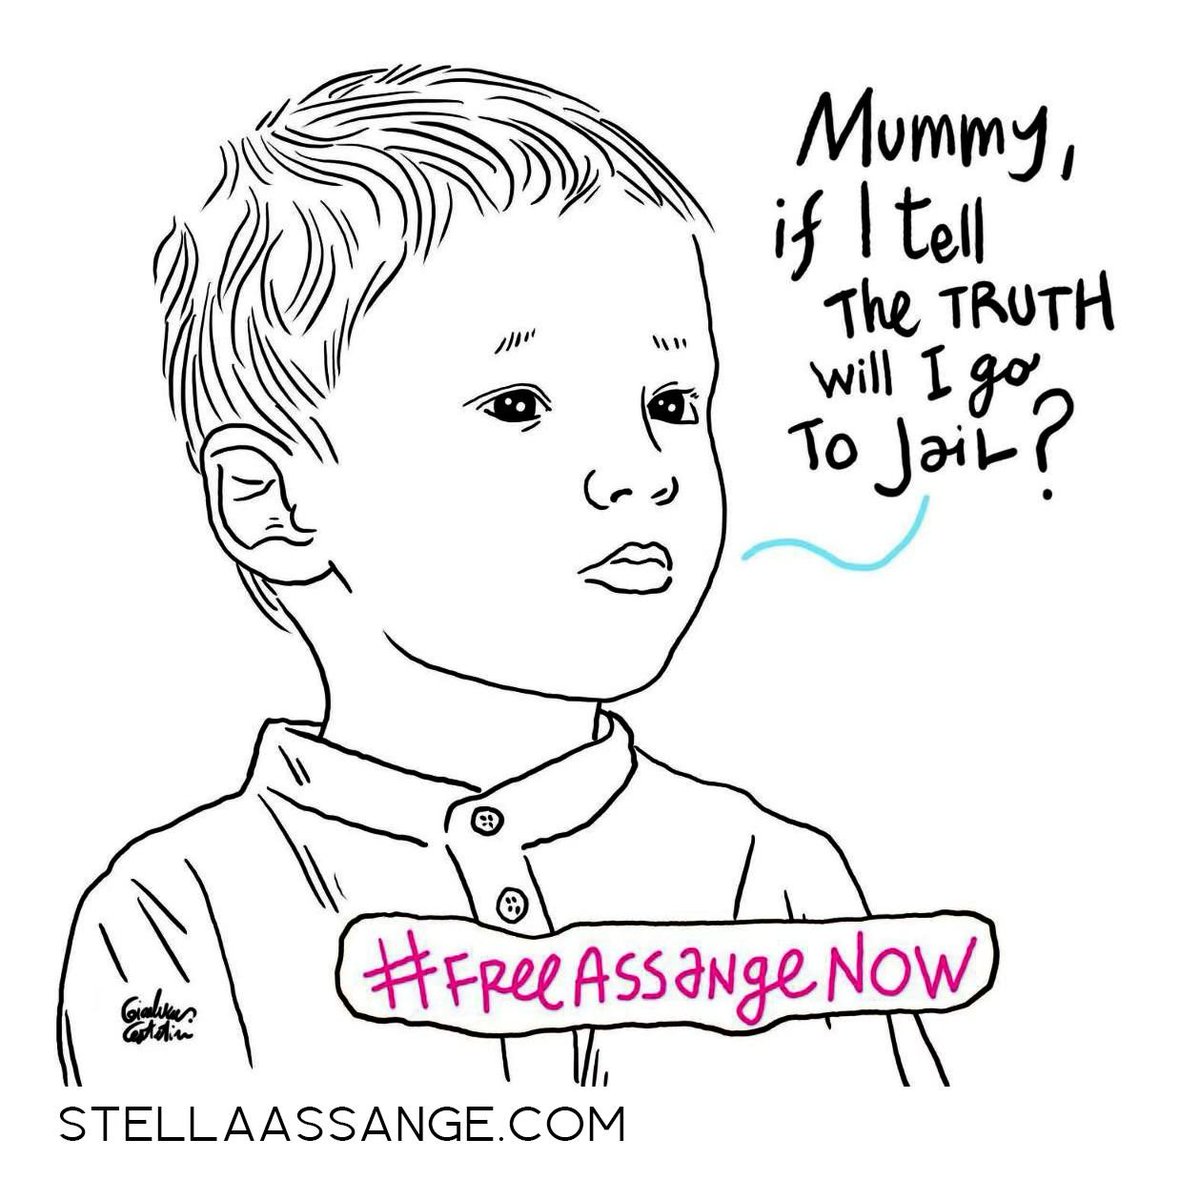 'Mummy, if I tell the truth will I go to jail?' - As we wait for the decision from the high court, we created a special collaboration with artist, Gianluca Costantini as a reminder of how simply this case can be explained. @Stella_Assange #MothersDay #FreeAssangeNOW